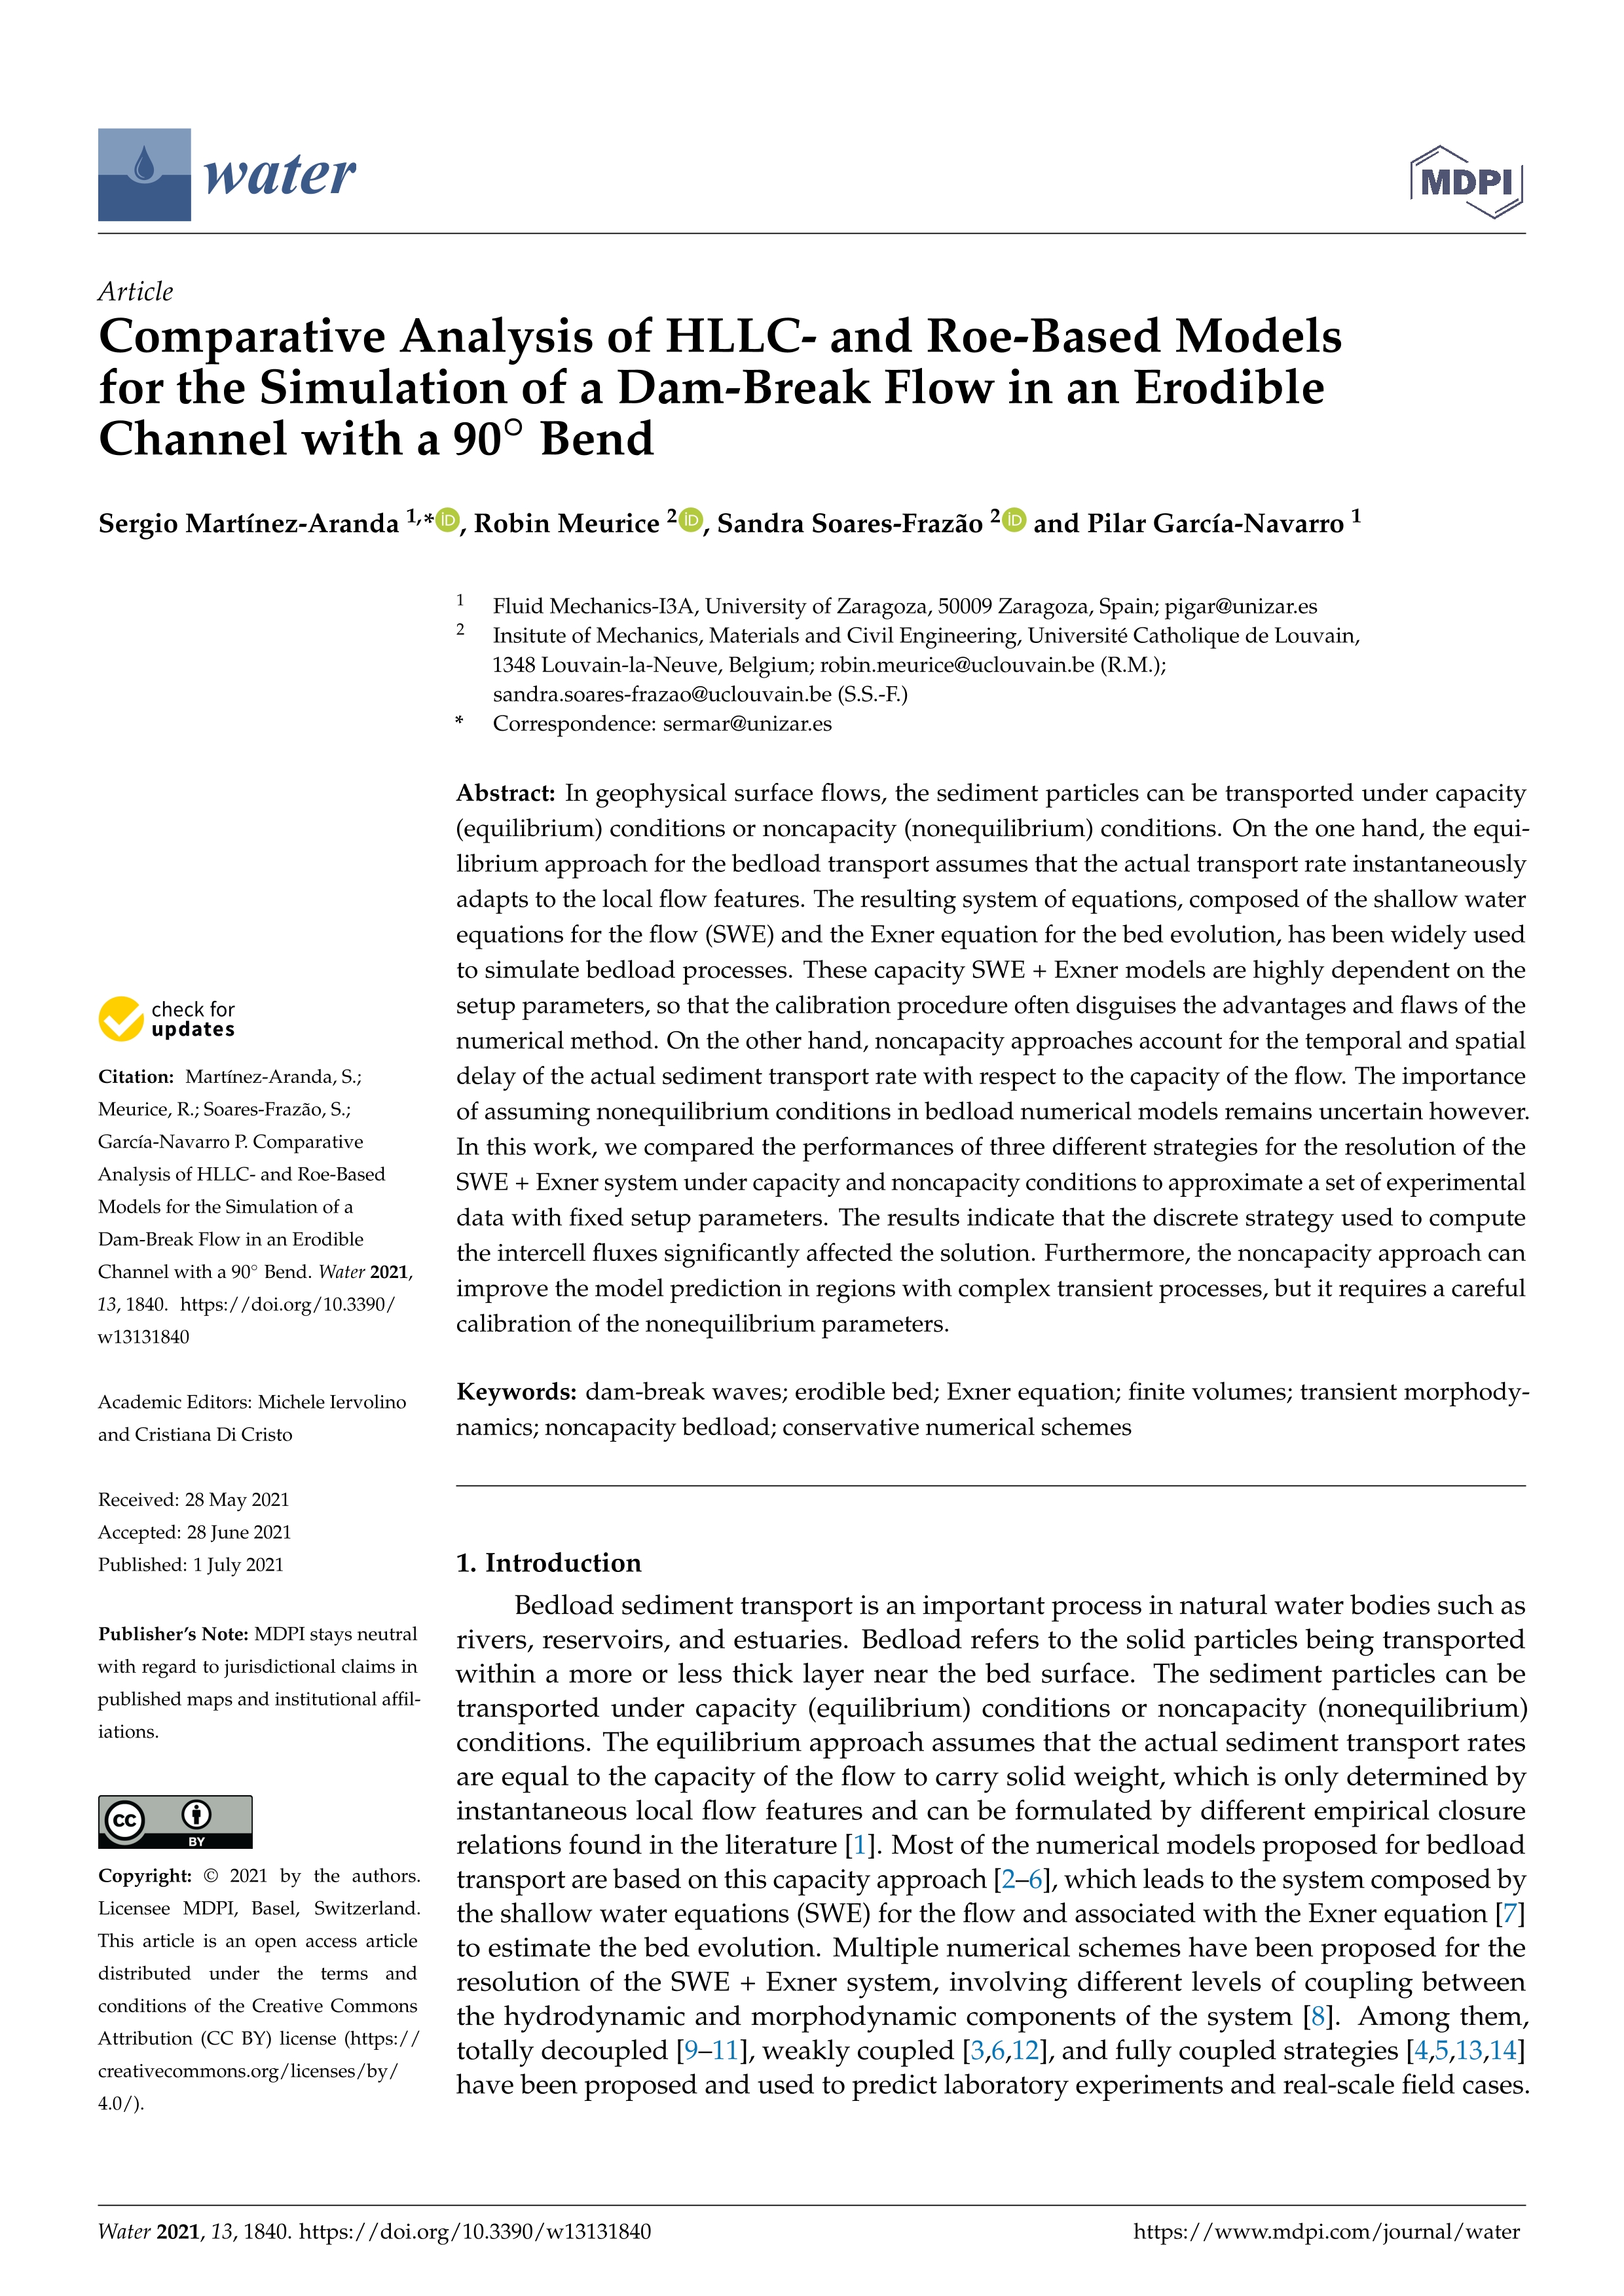 Comparative analysis of HLLC-and roe-based models for the simulation of a dam-break flow in an erodible channel with a 90¿ bend